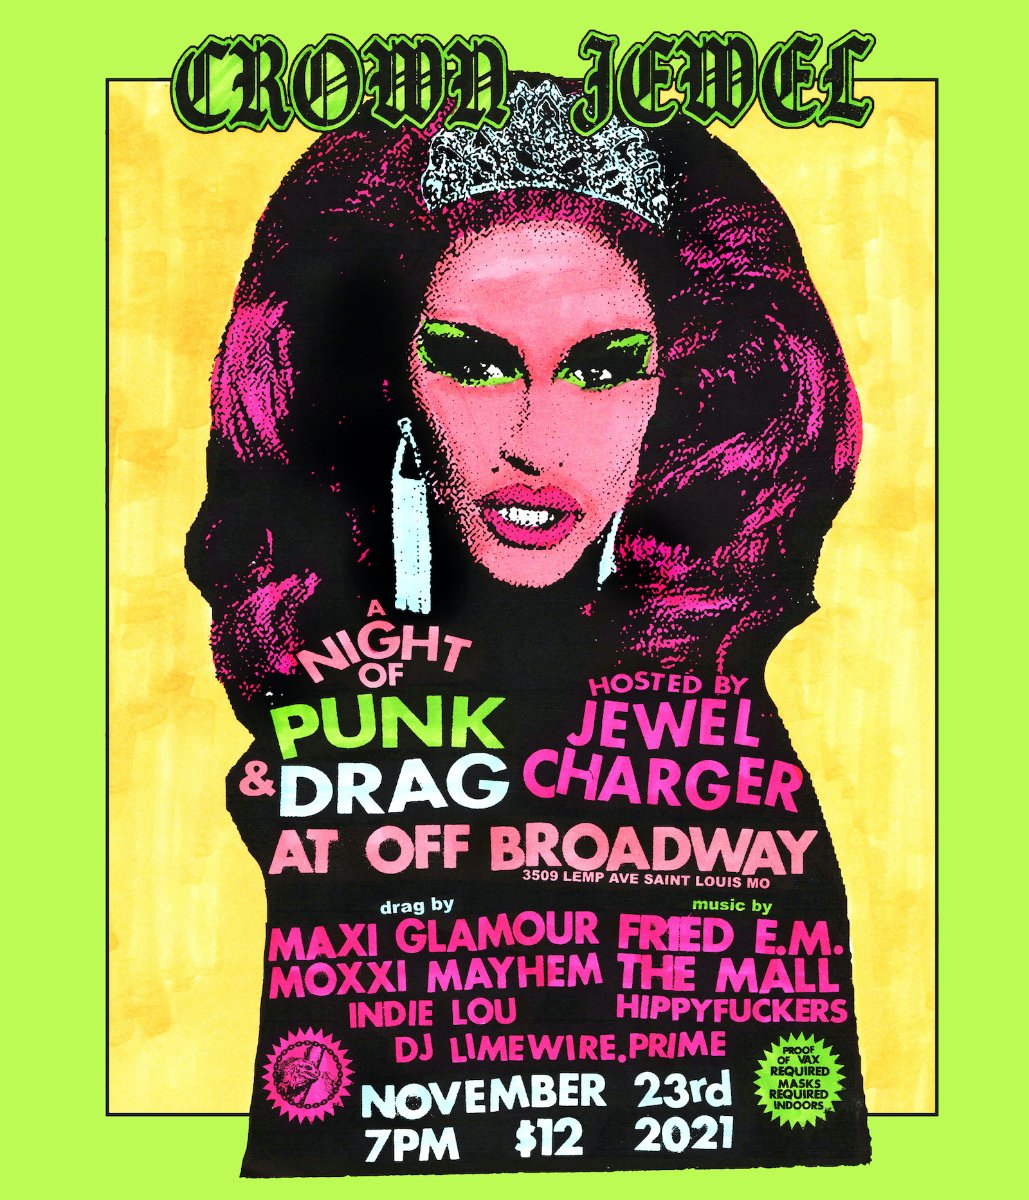 Tonight! Crown Jewel: A Night of Punk & Drag Takes Over @offbroadwaystl! Hosted by Jewel Charger! 
Drag Featuring:
Maxi Glamour, Moxxi Mayhem, Indie Lou
Music by:
Fried E.M., The Mall, Hippyfuckers, DJ Limewire Prime 
#LoveOfMusicMagazine #PunkDrag #STL 

offbroadwaystl.com/event/11423905…